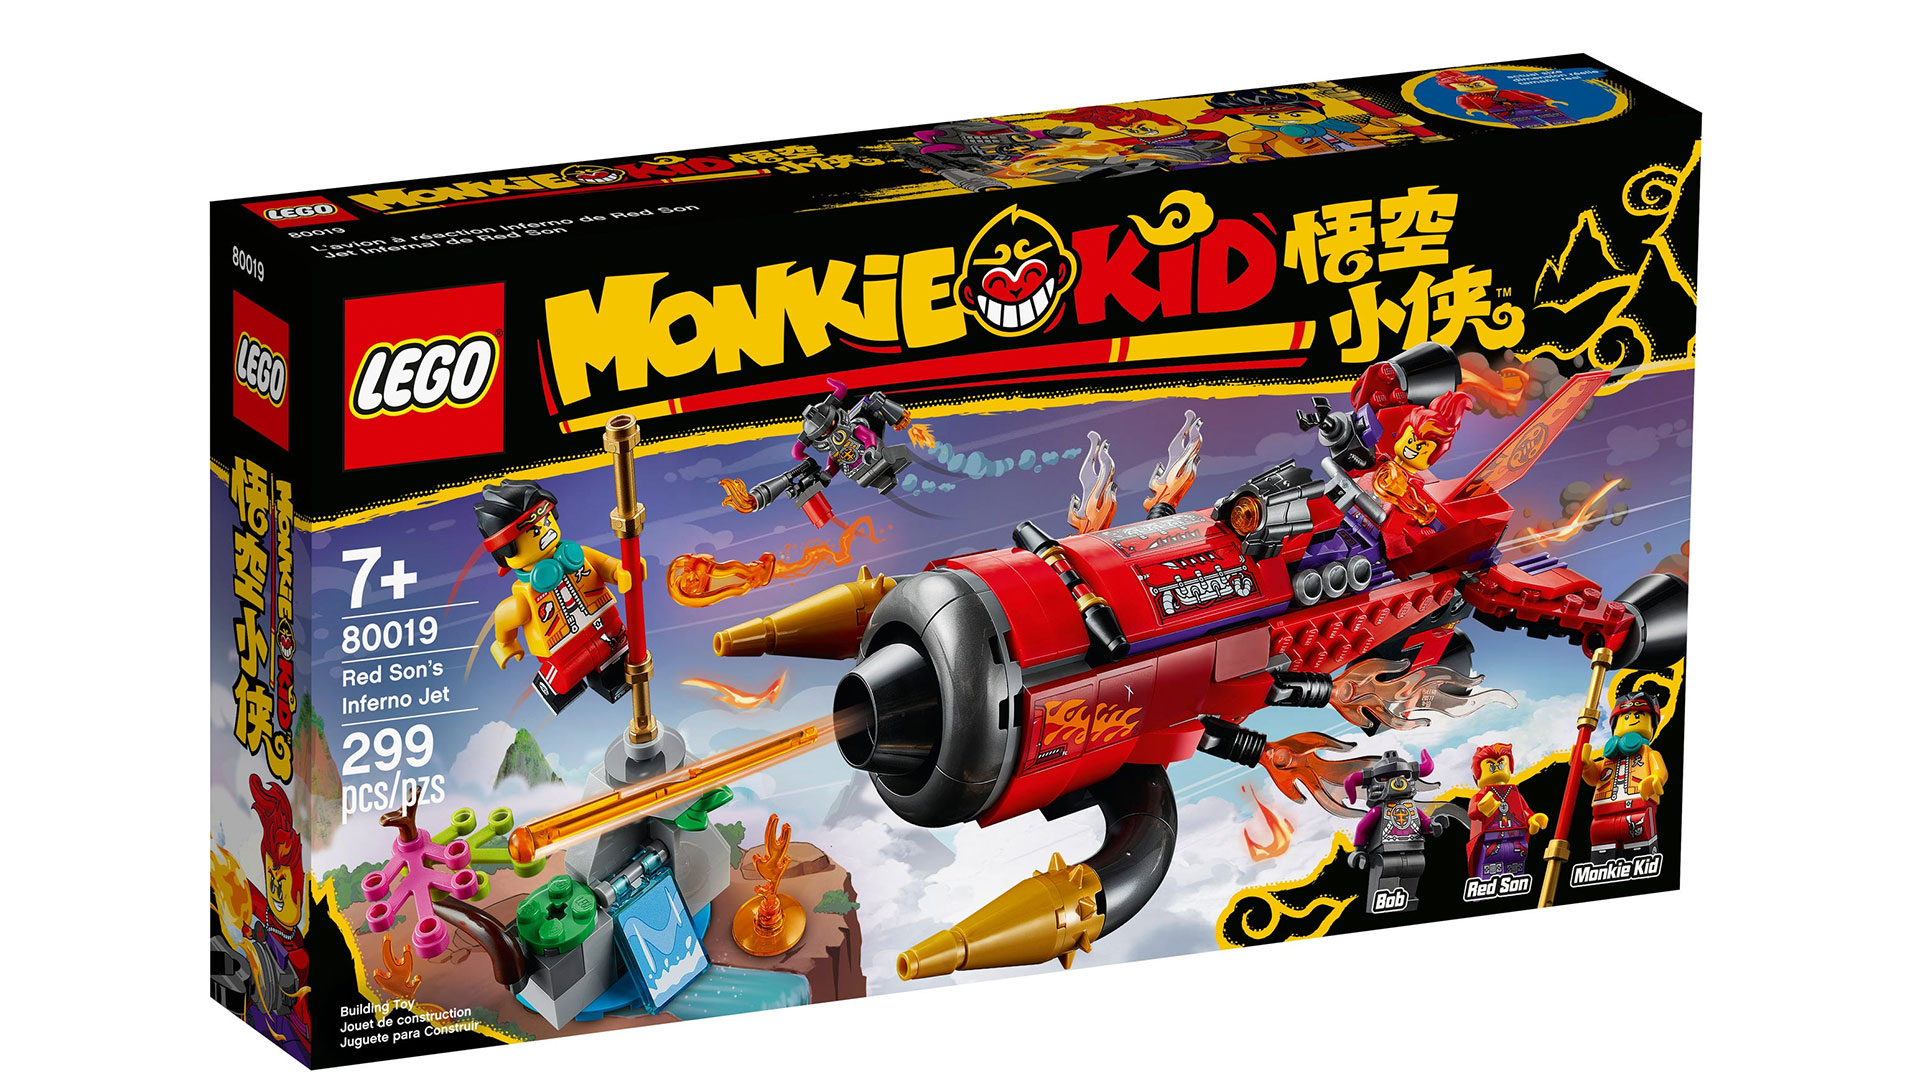 Spark children’s creativity with this action-packed LEGO® Monkie Kid™ toy playset (80019), featuring Red Son’s Inferno Jet, a Flower Fruit Mountain mini build and The Golden Staff. The jet features a minifigure cockpit and 2 spring-loaded shooters. A super gift idea for kids, this set also includes Monkie Kid, Red Son and Bob minifigures with weapons and accessory elements such as Red Son’s Power Glove and a LEGO toy jetpack to inspire fun, imaginative play.